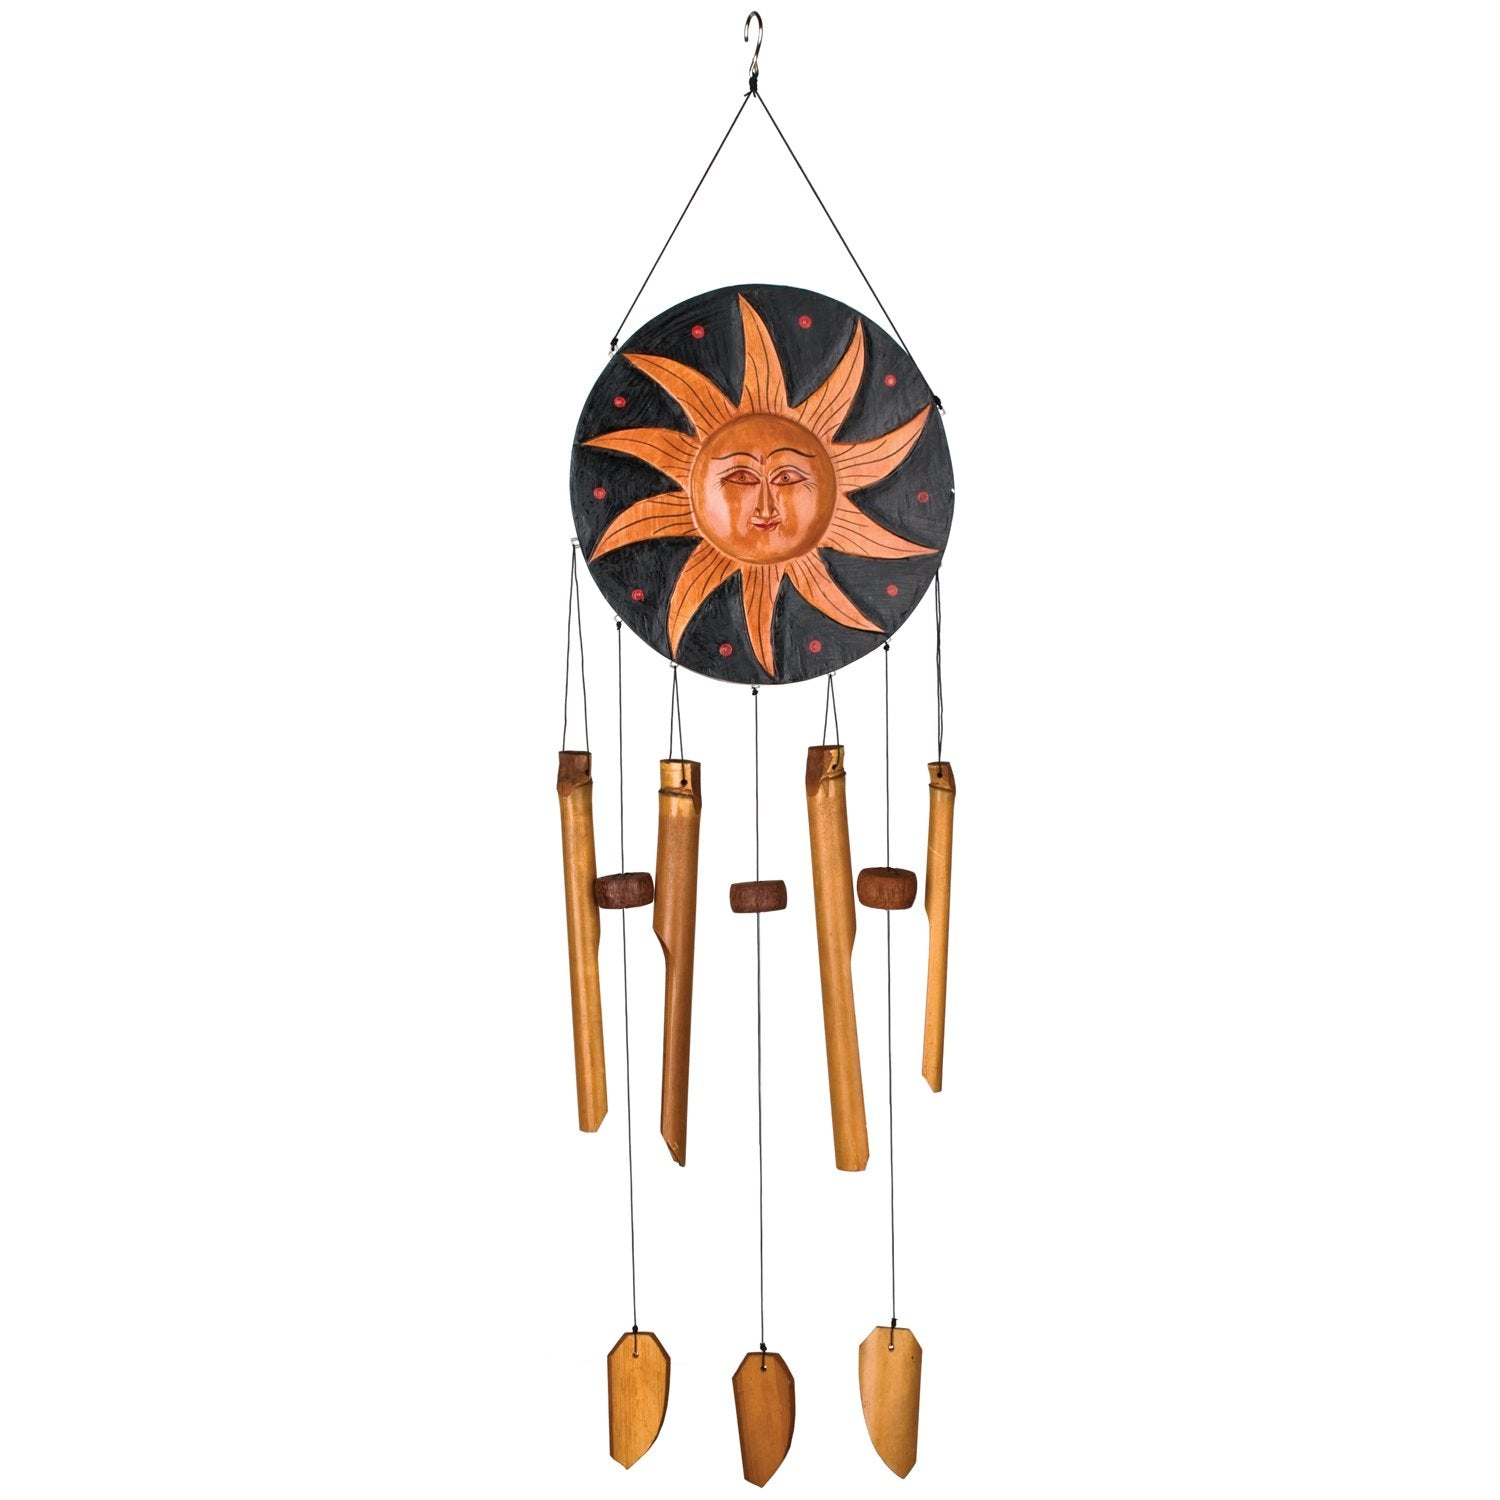 Celestial Bamboo Chime full product image